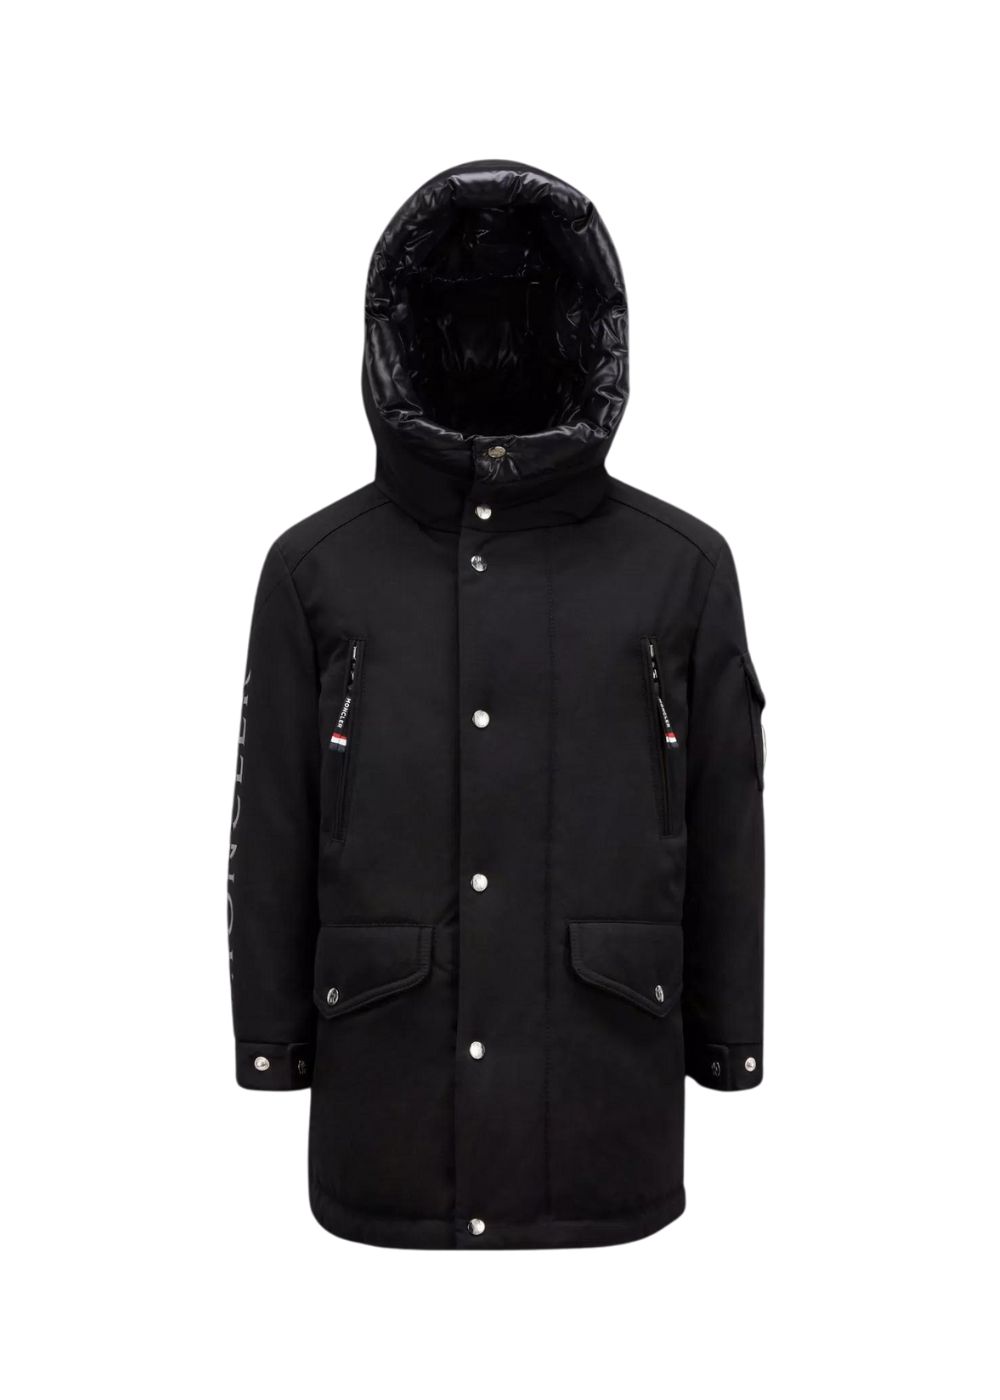 Featured image for “Moncler Piumino Dilare”